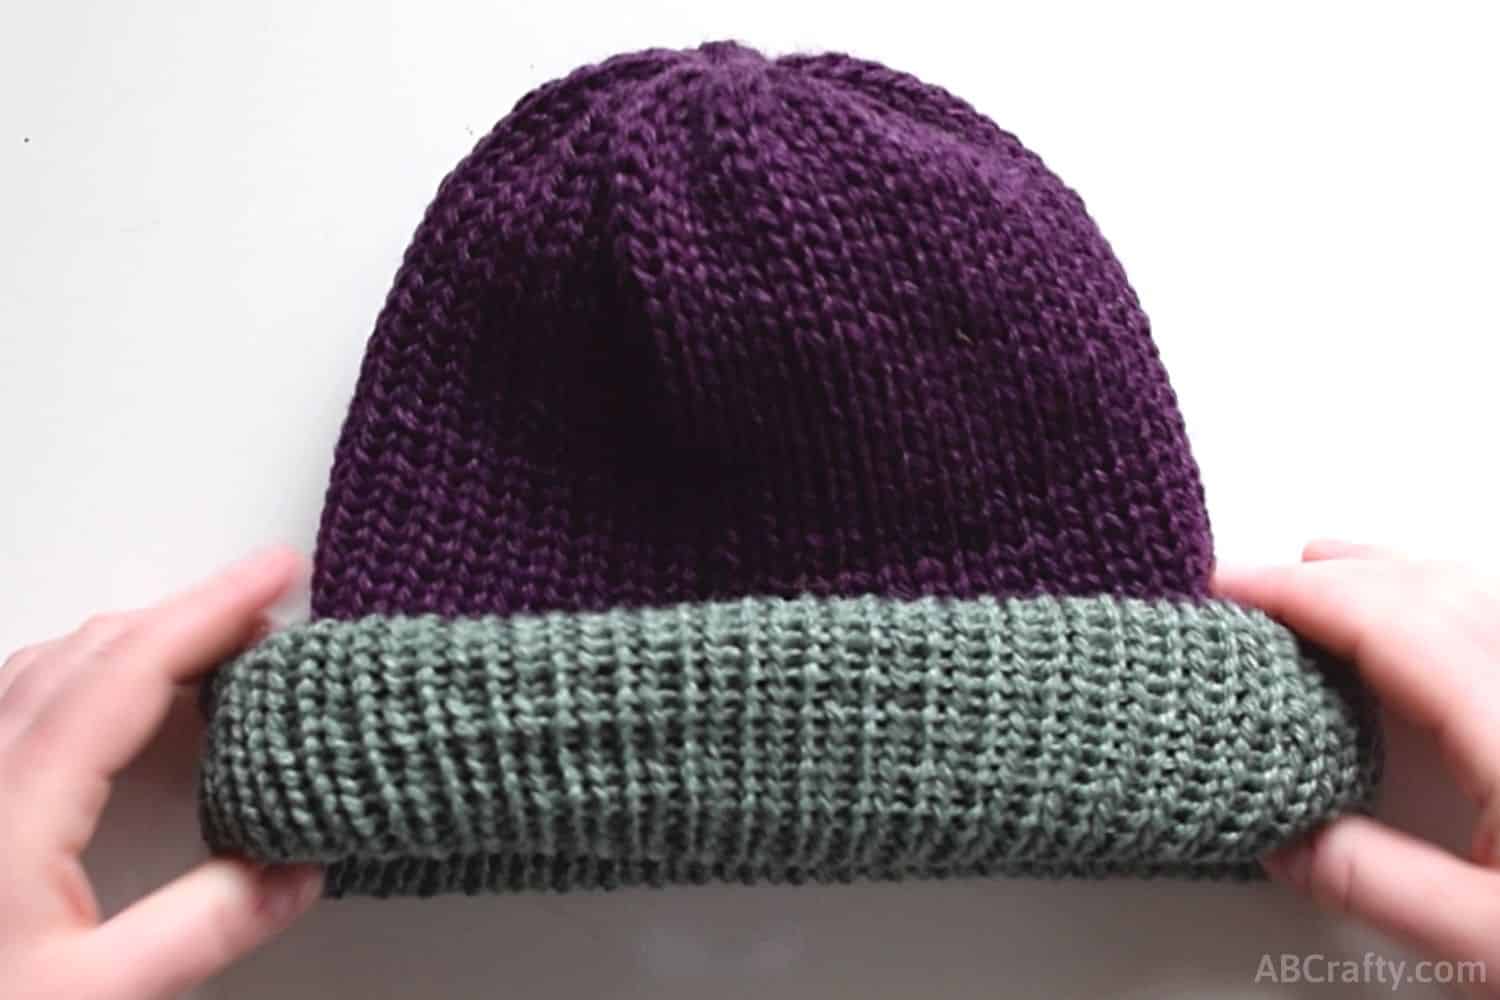 got a sentro knitting machine and decided to make a beanie for my firs